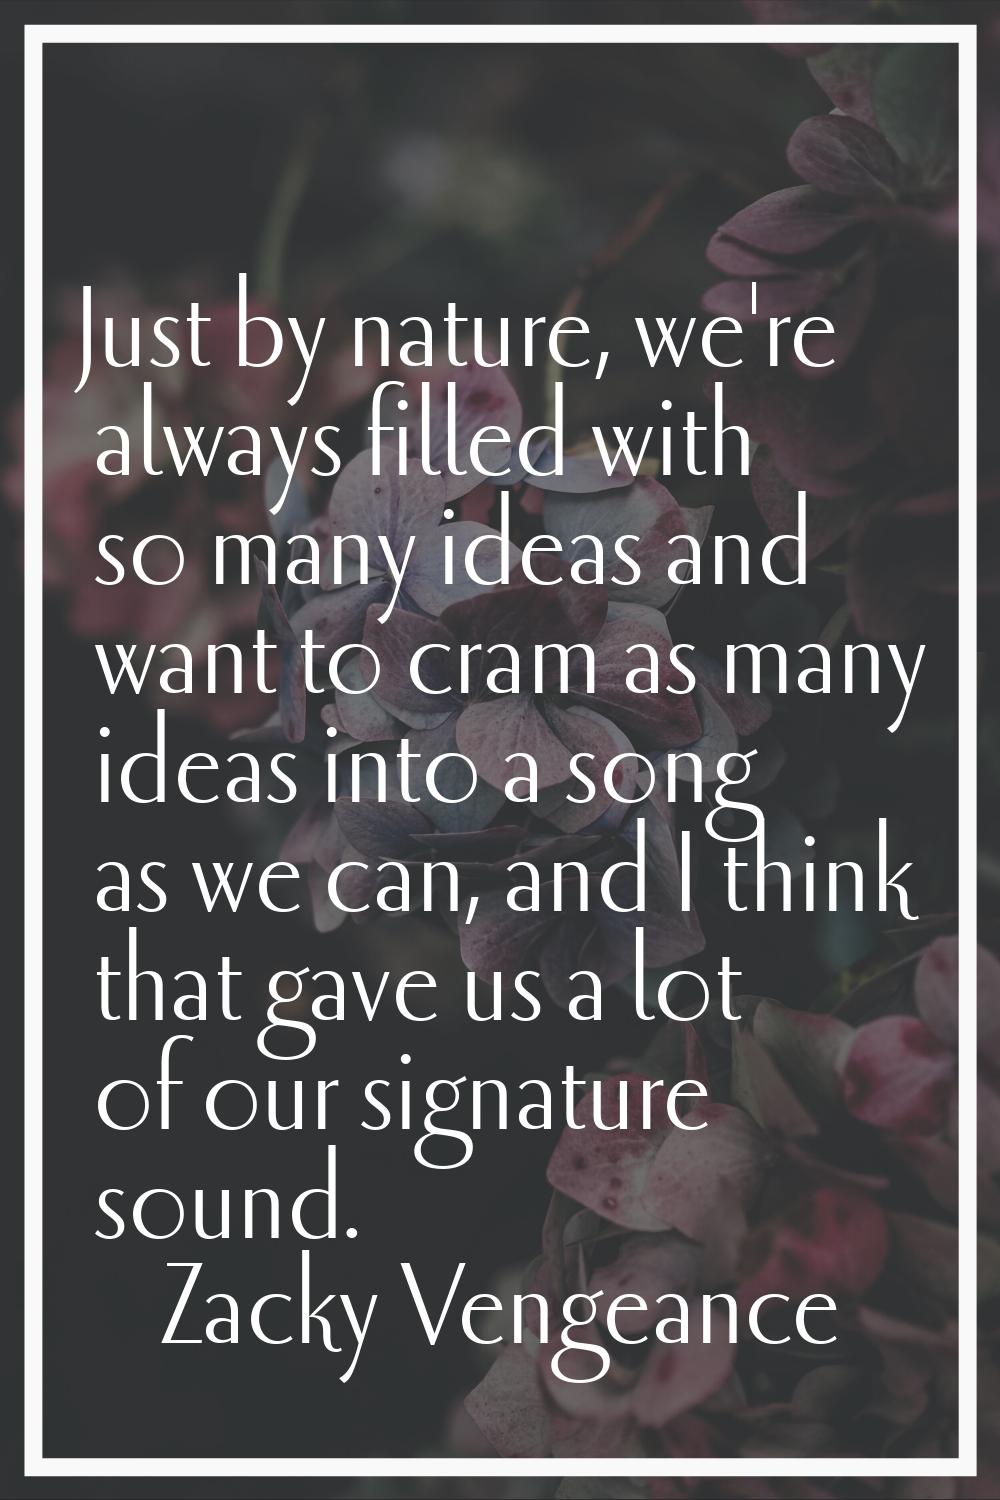 Just by nature, we're always filled with so many ideas and want to cram as many ideas into a song a